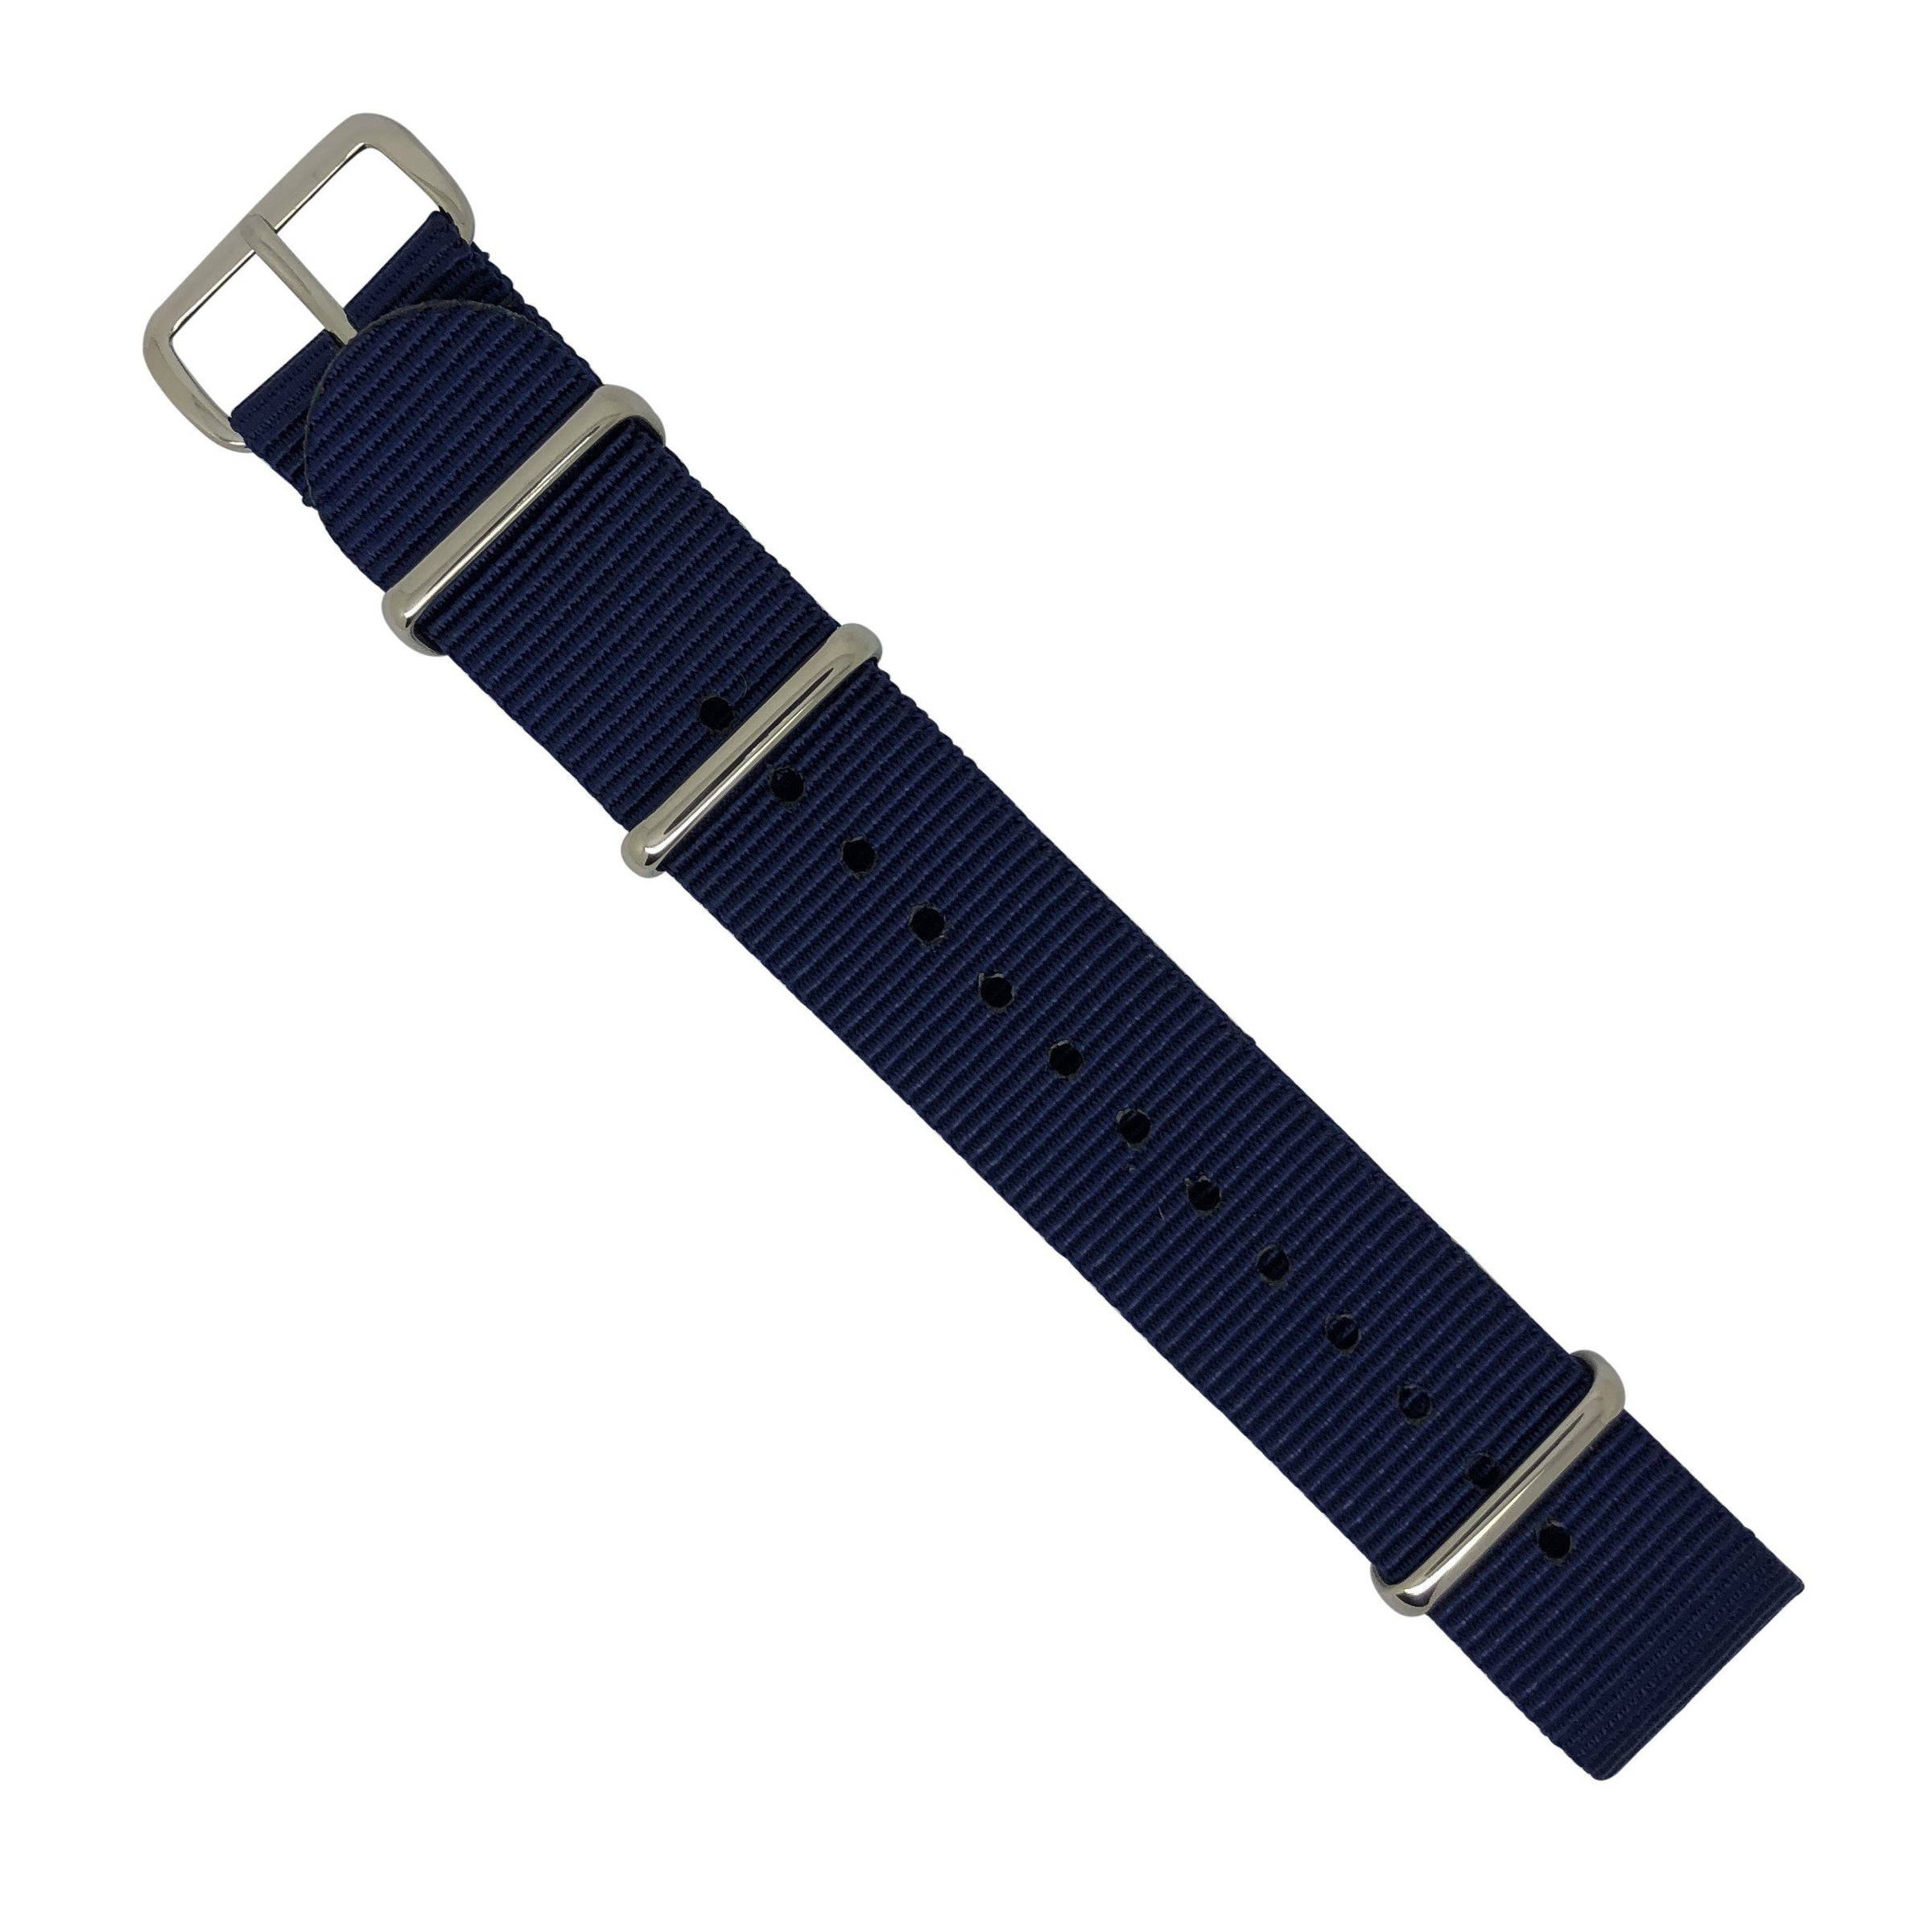 Premium Nato Strap in Navy with Polished Silver Buckle (18mm) - Nomad Watch Works Malaysia